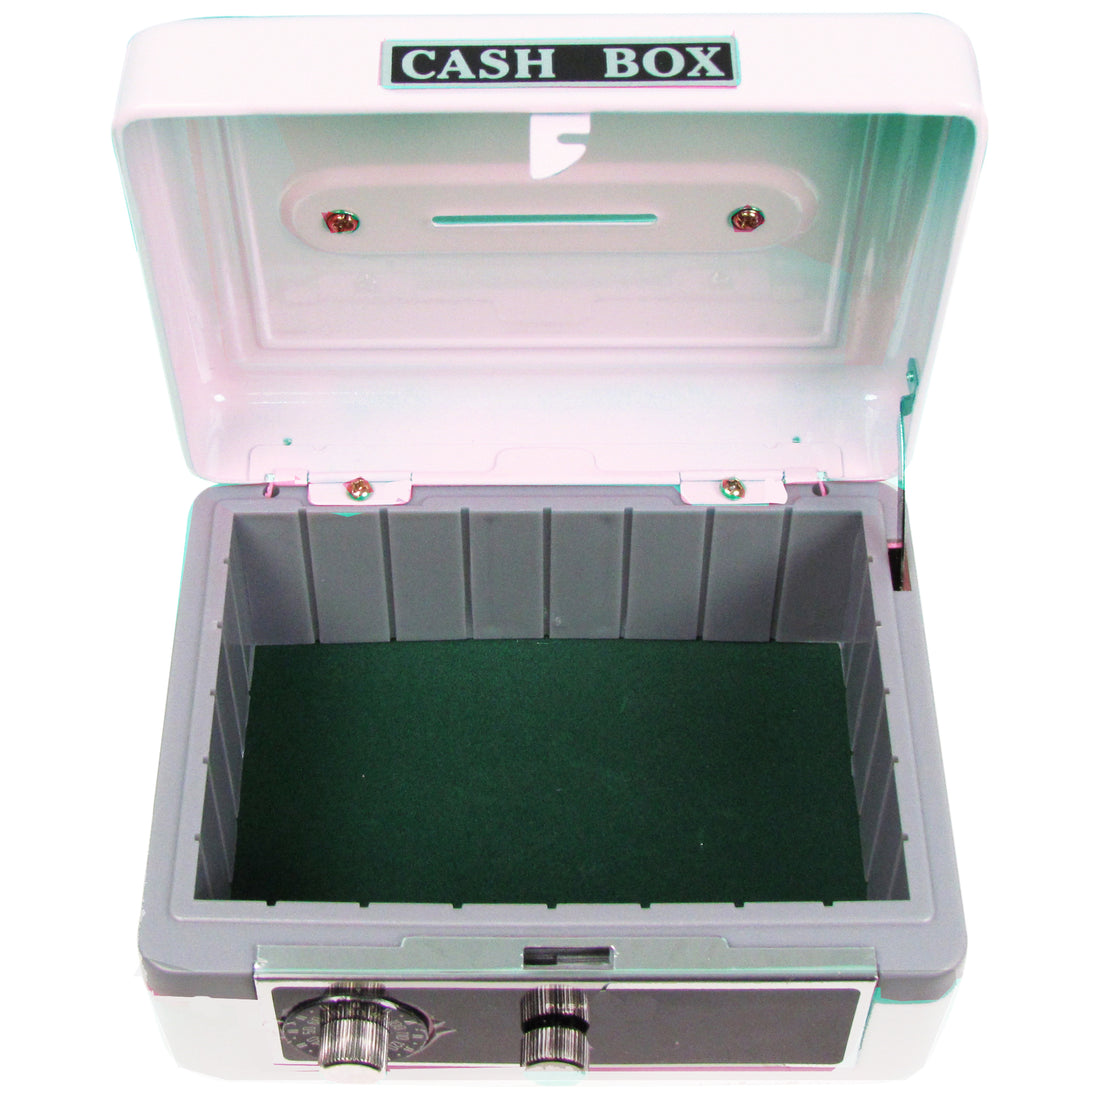 Personalized White Cash Box with Ice Hockey design